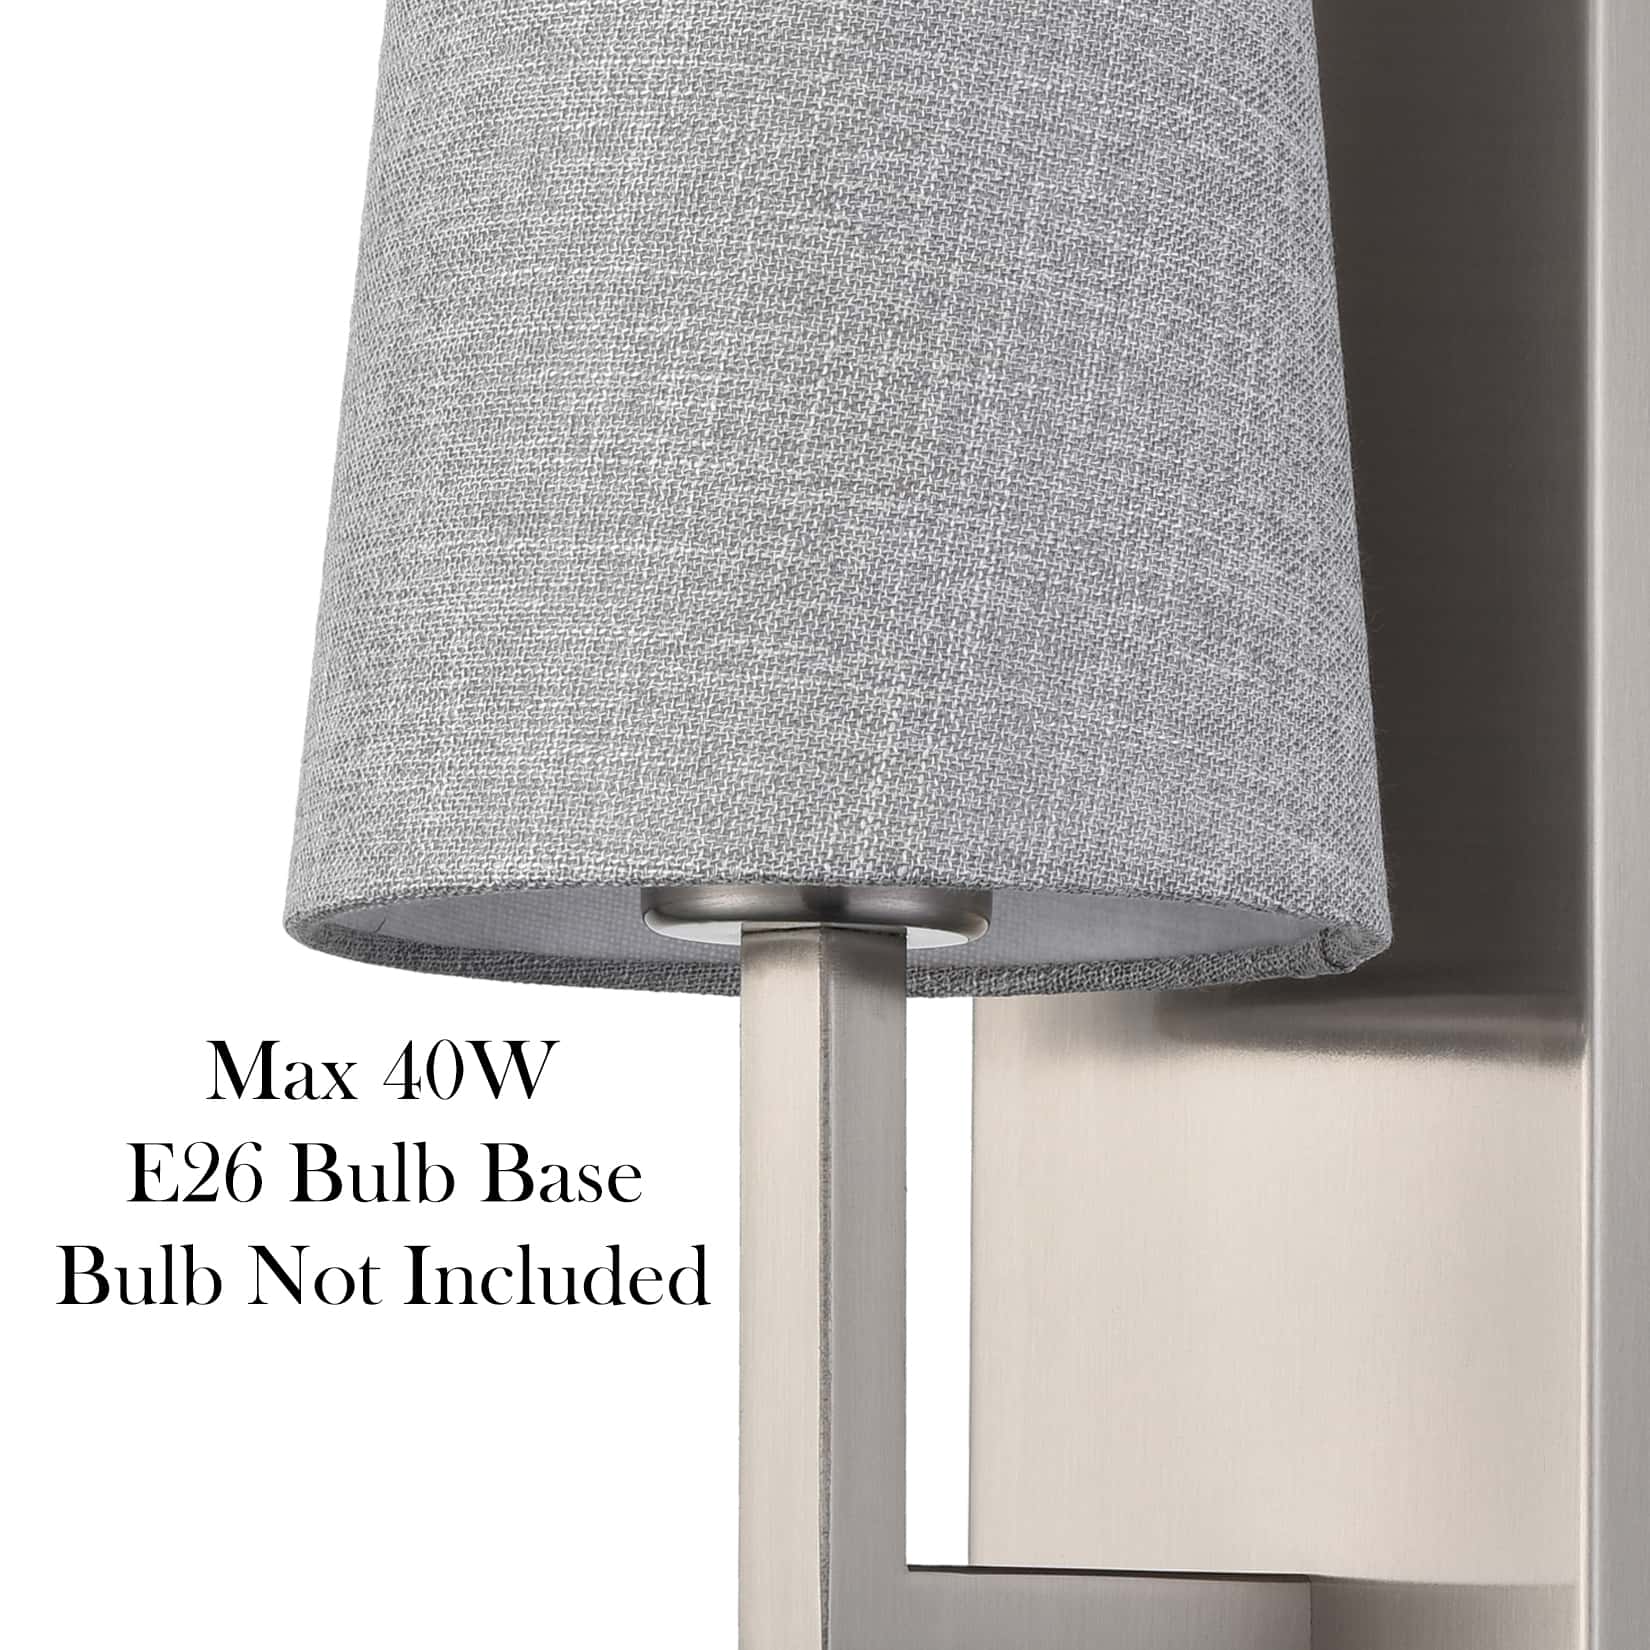 Brushed Nickel Wall Sconce with Grey Fabric Shade 2 Pack